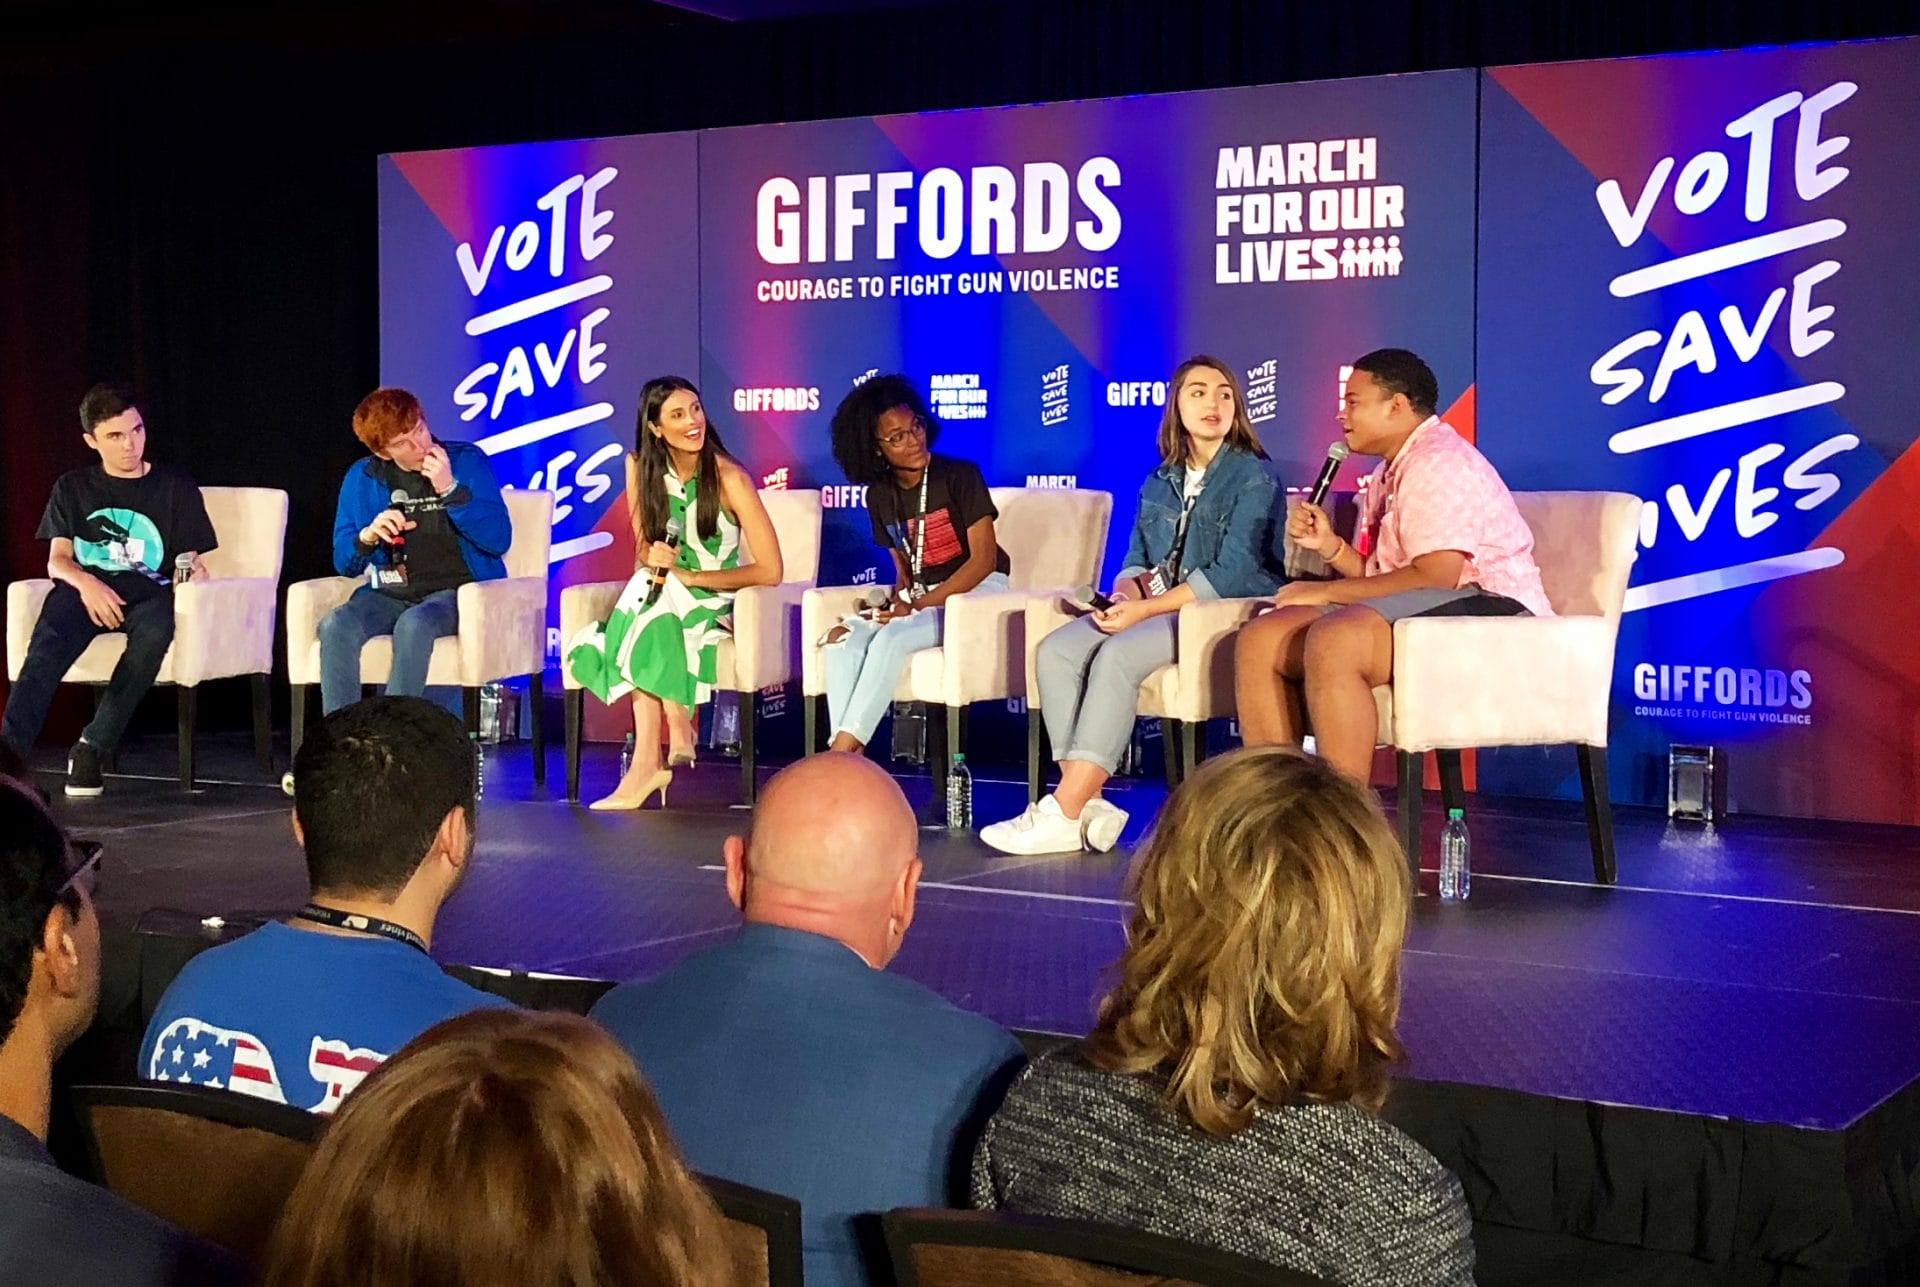 Marcel McClinton (far right) on stage at the Vote Save Lives event in Houston, the weekend before the 2018 midterm election.